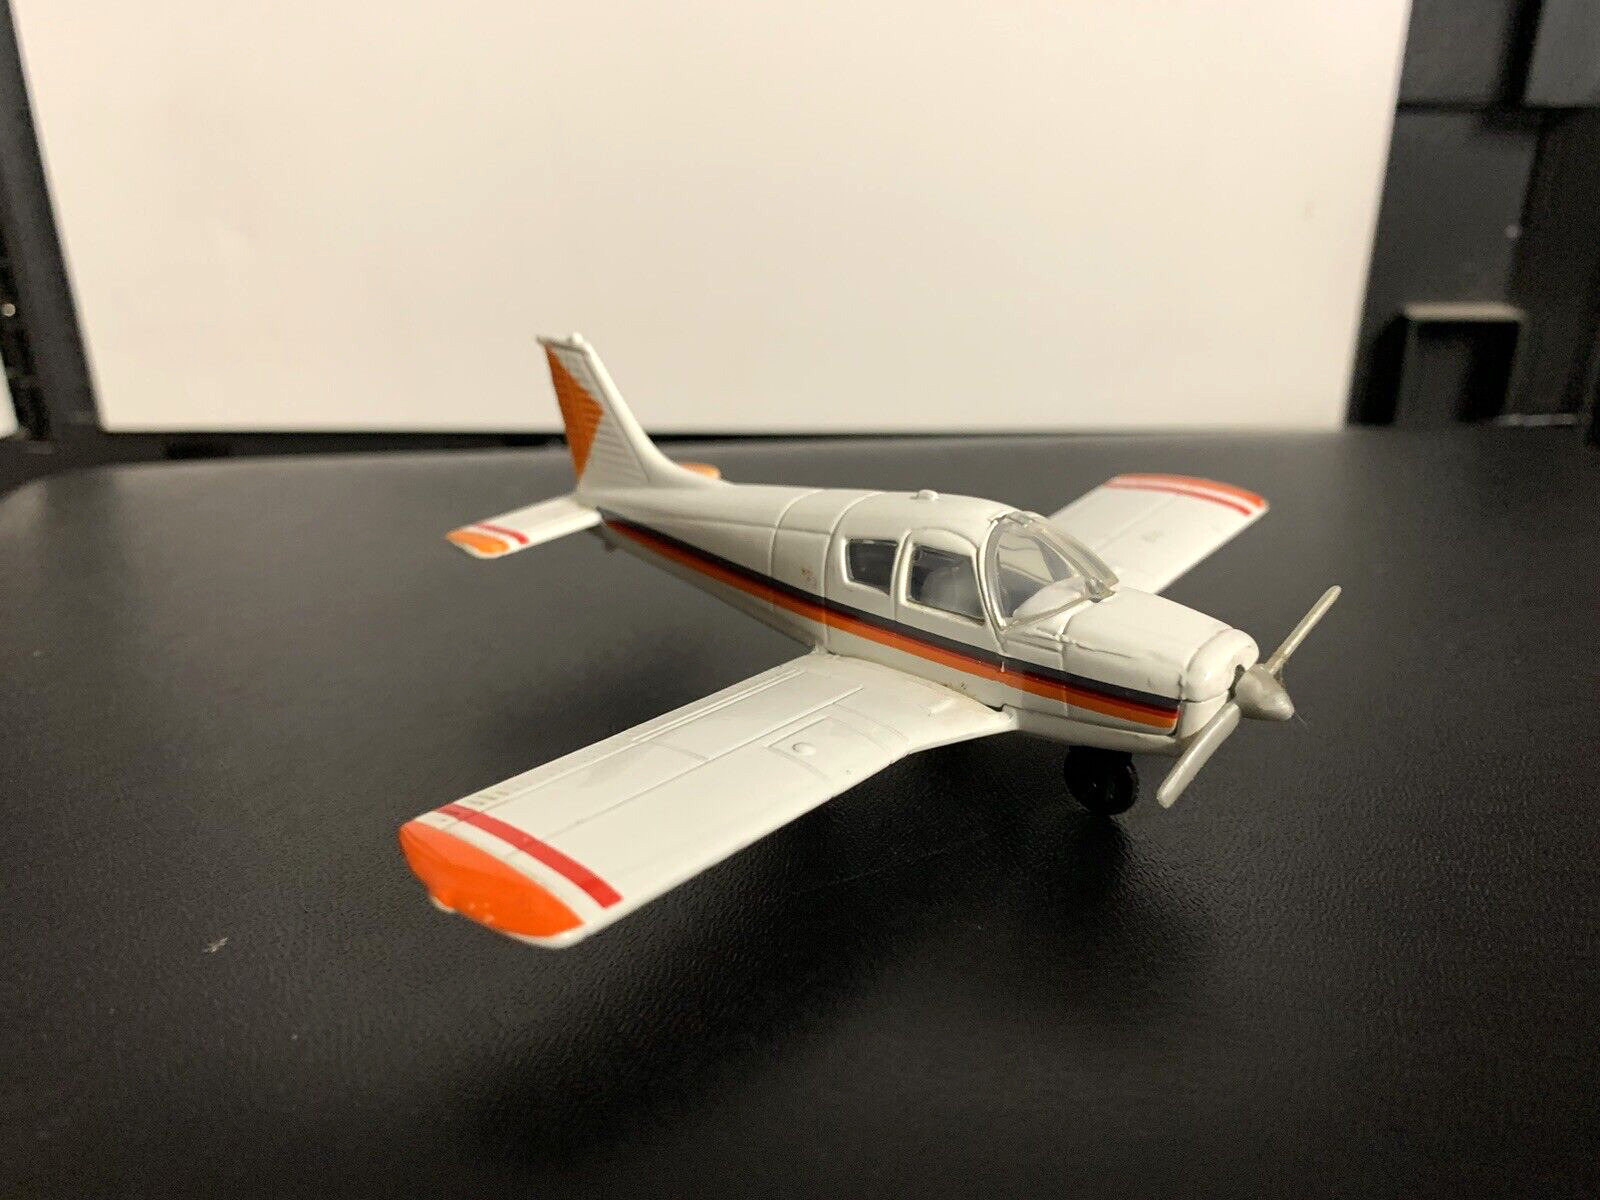 PIPER AIRCRAFT CORP PIPER CHEROKEE LOW WING-4 SEAT-ALL METAL DIE CAST MODEL